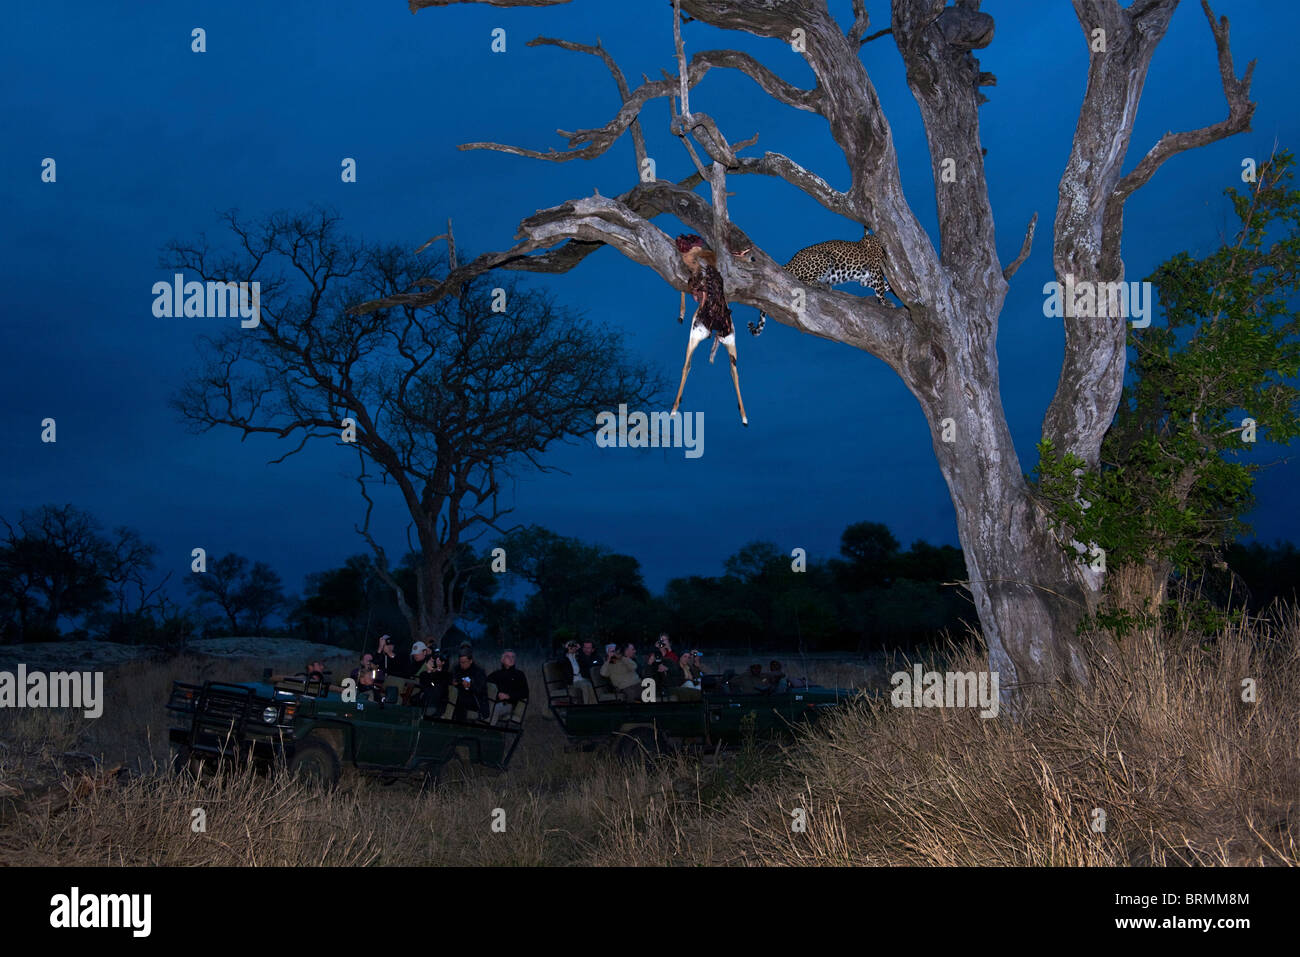 Tourists in an open game drive vehicle viewing a leopard in a tree at dusk Stock Photo